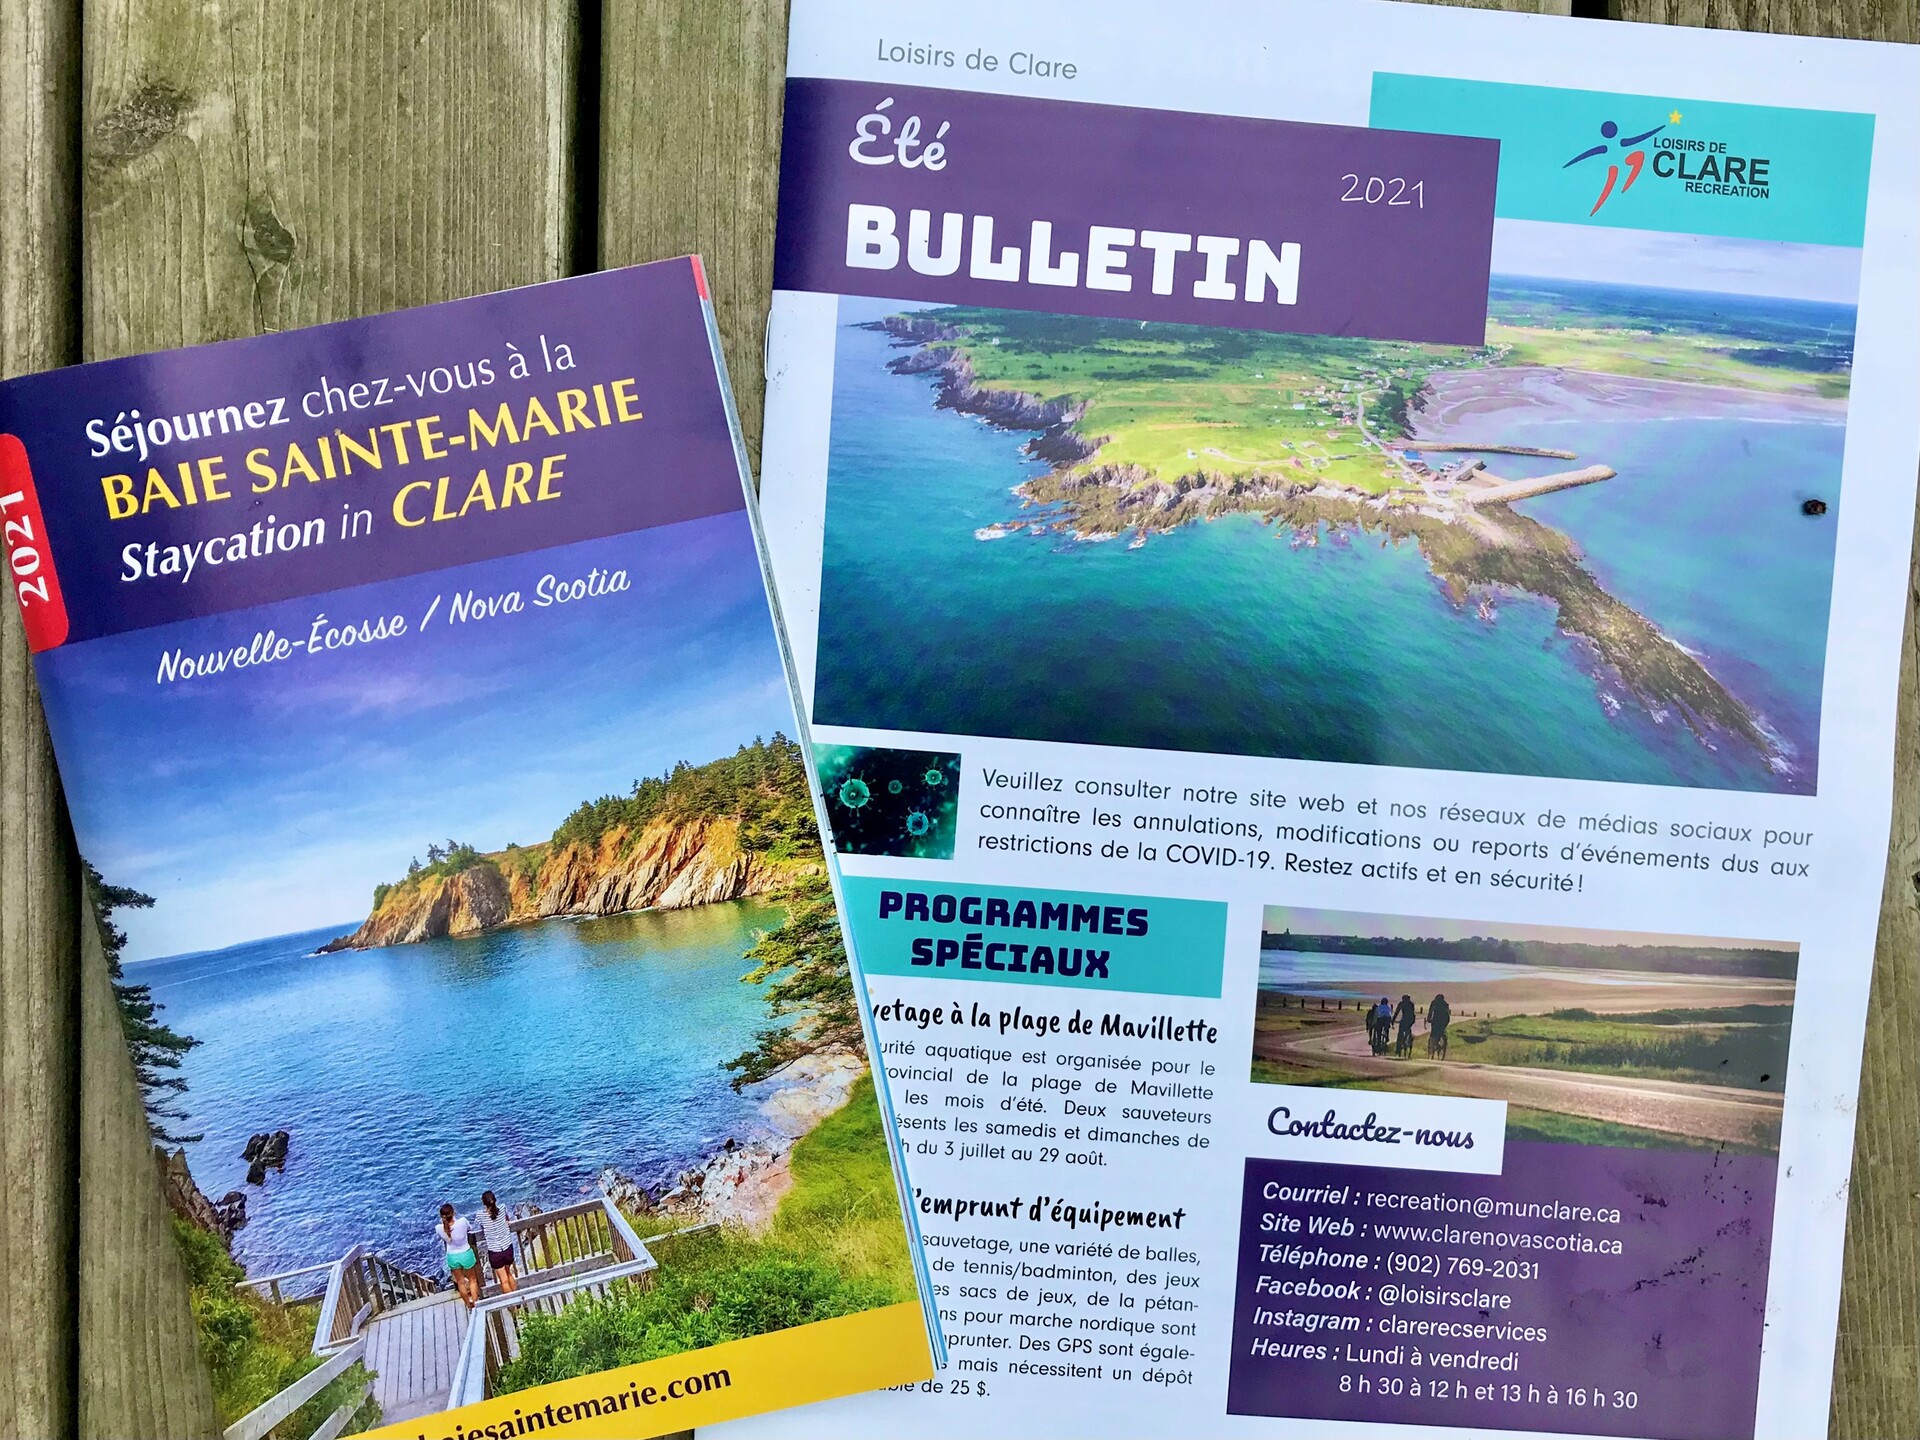 A photo of the 2021 Clare visitor's guide and the Clare Recreation newsletter